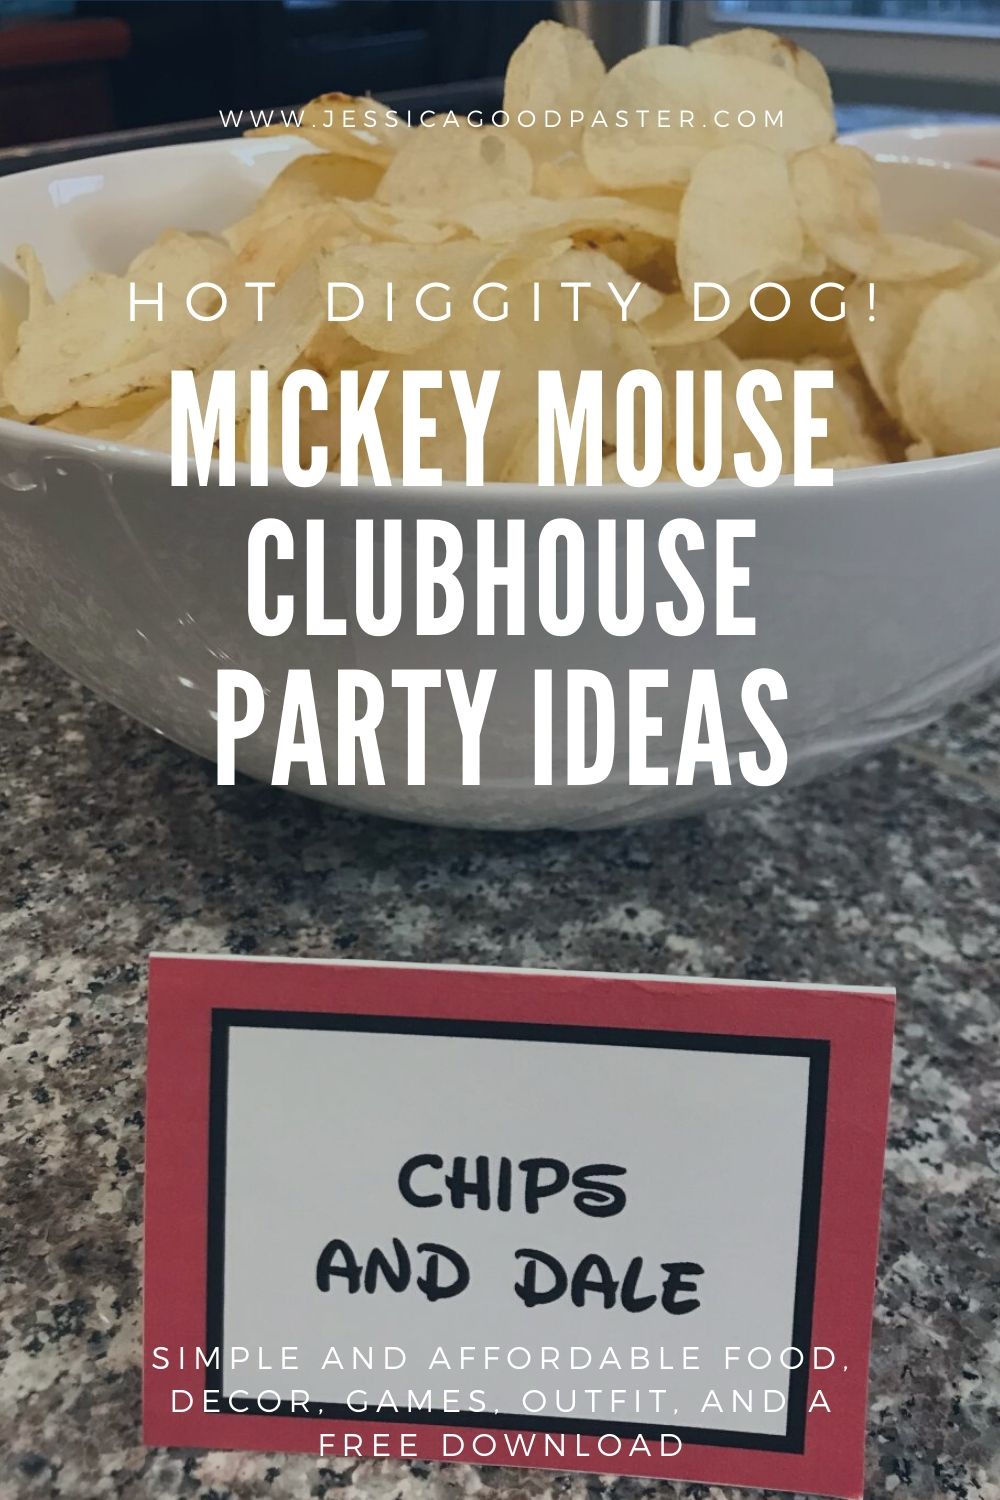 How to Host an Amazing Mickey Mouse Party on a Budget |Chips and Dale | Tons of affordable options for Mickey or Minnie parties including food ideas, decorations, outfits, games, party supplies, and free printables! Your Mickey Mouse Clubhouse fan will have a great birthday ! #mickeyparty #mickeymouse #mickeymouseparty #minnieparty #birthday #mickeymouseclubhouse #mickeyprintables